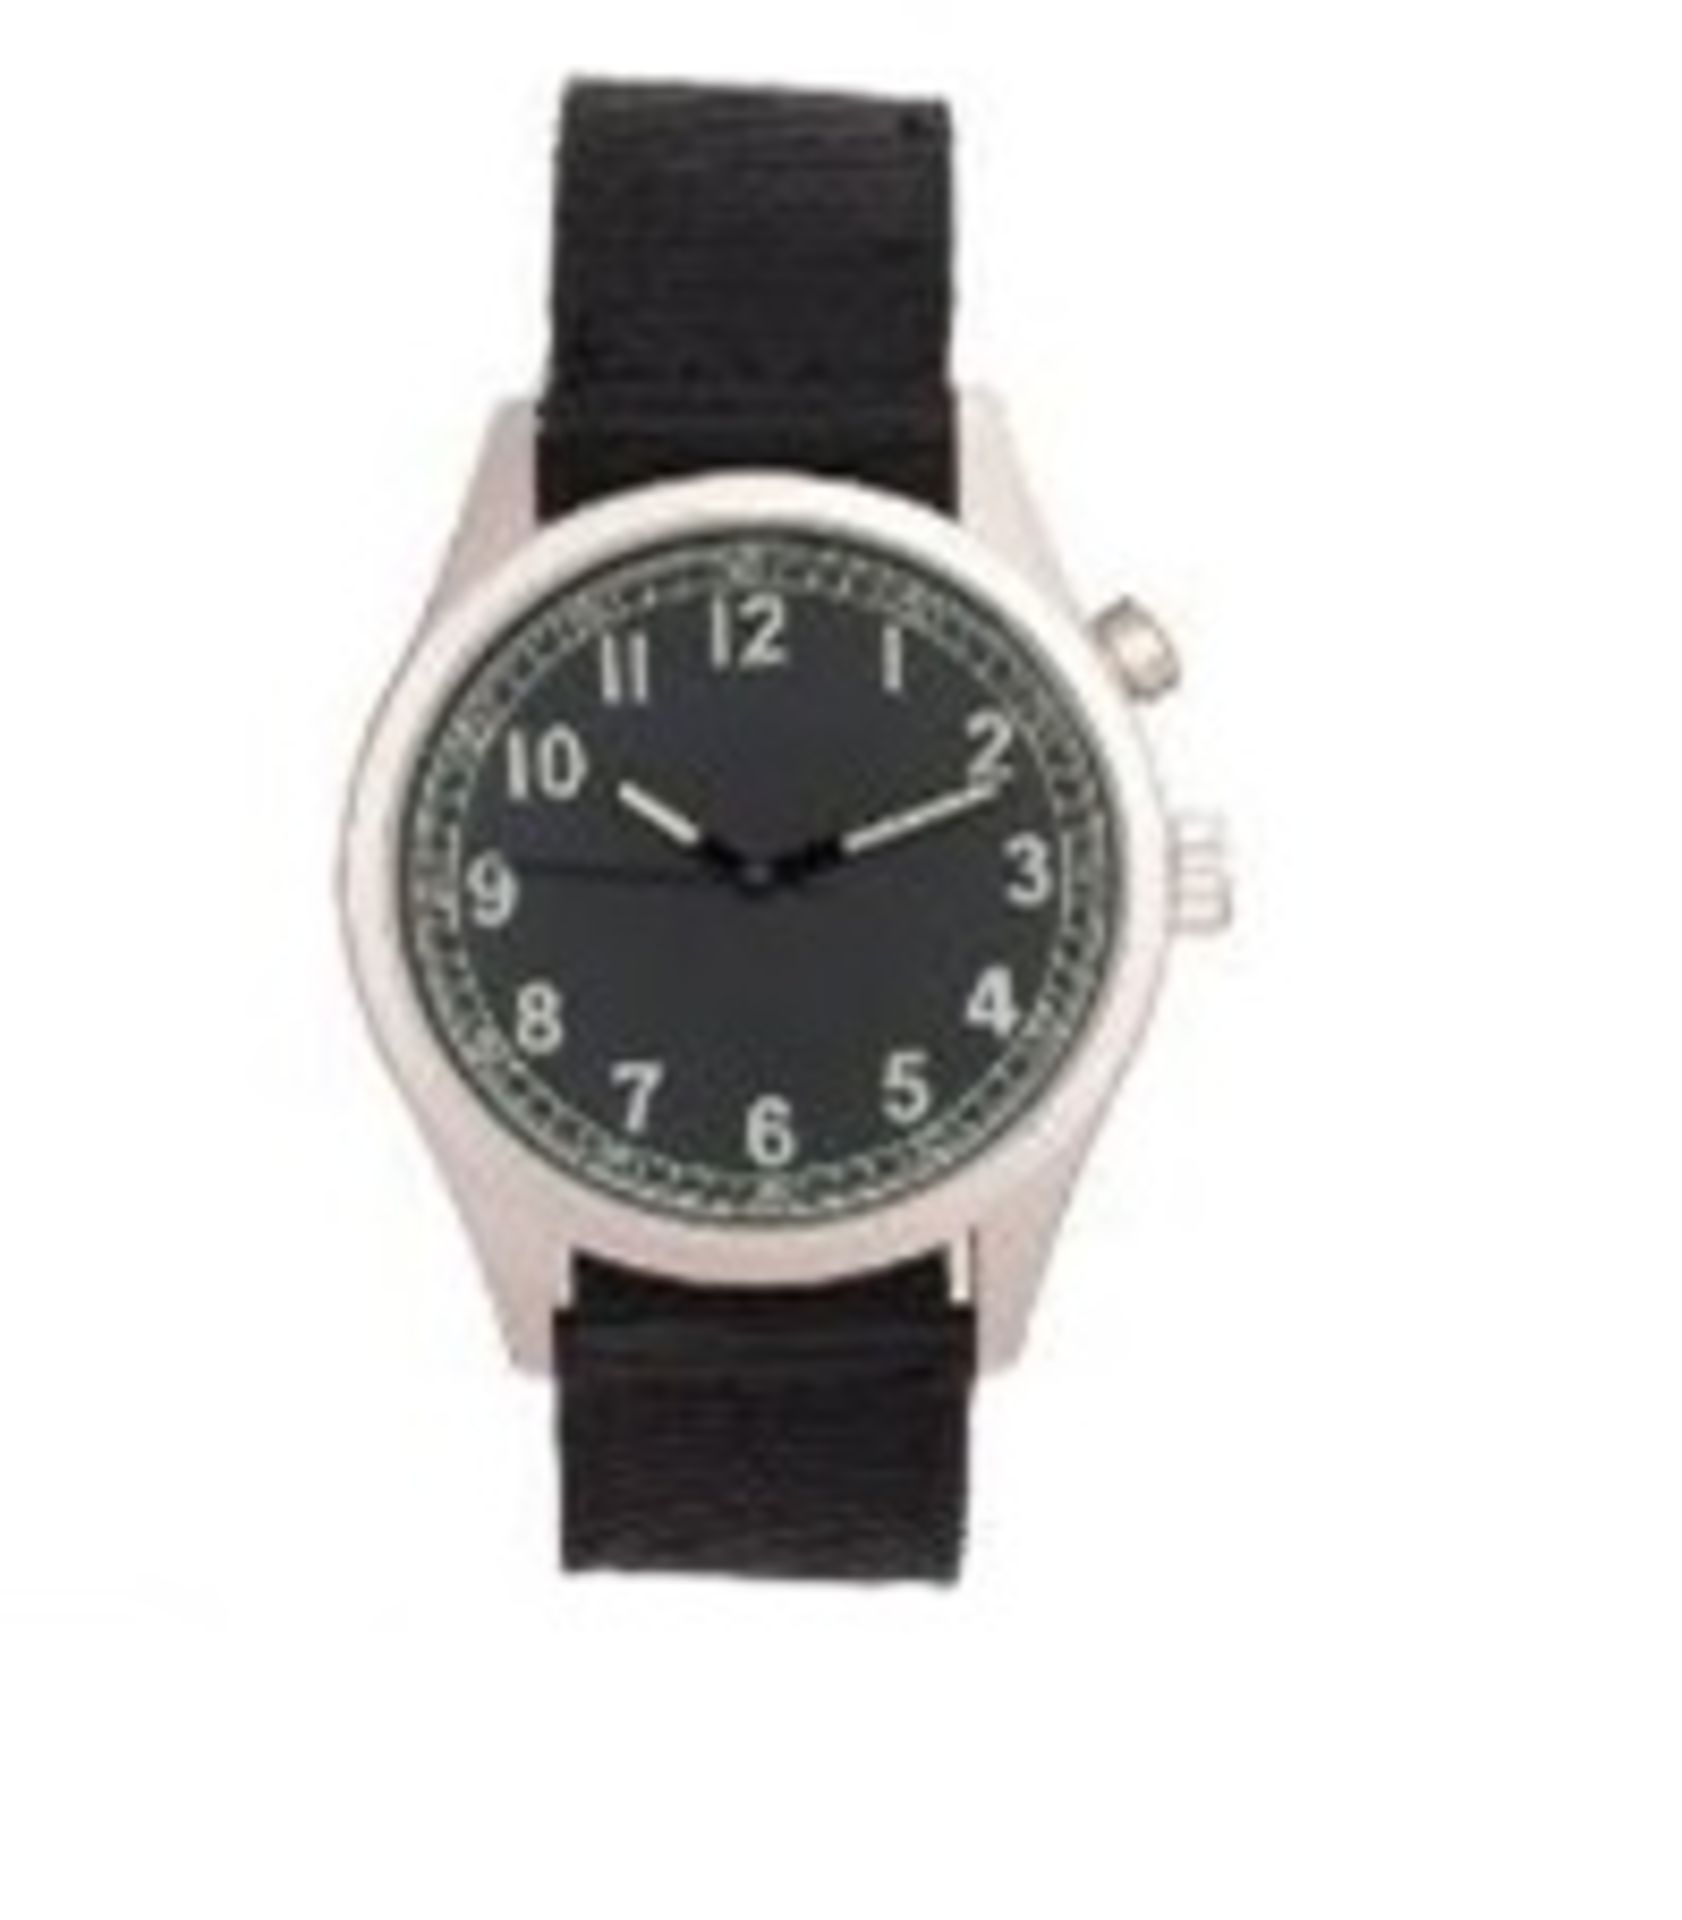 V Brand New Gents 1950s Swedish Soldiers Watch With Engraved Back & Presentation Watch